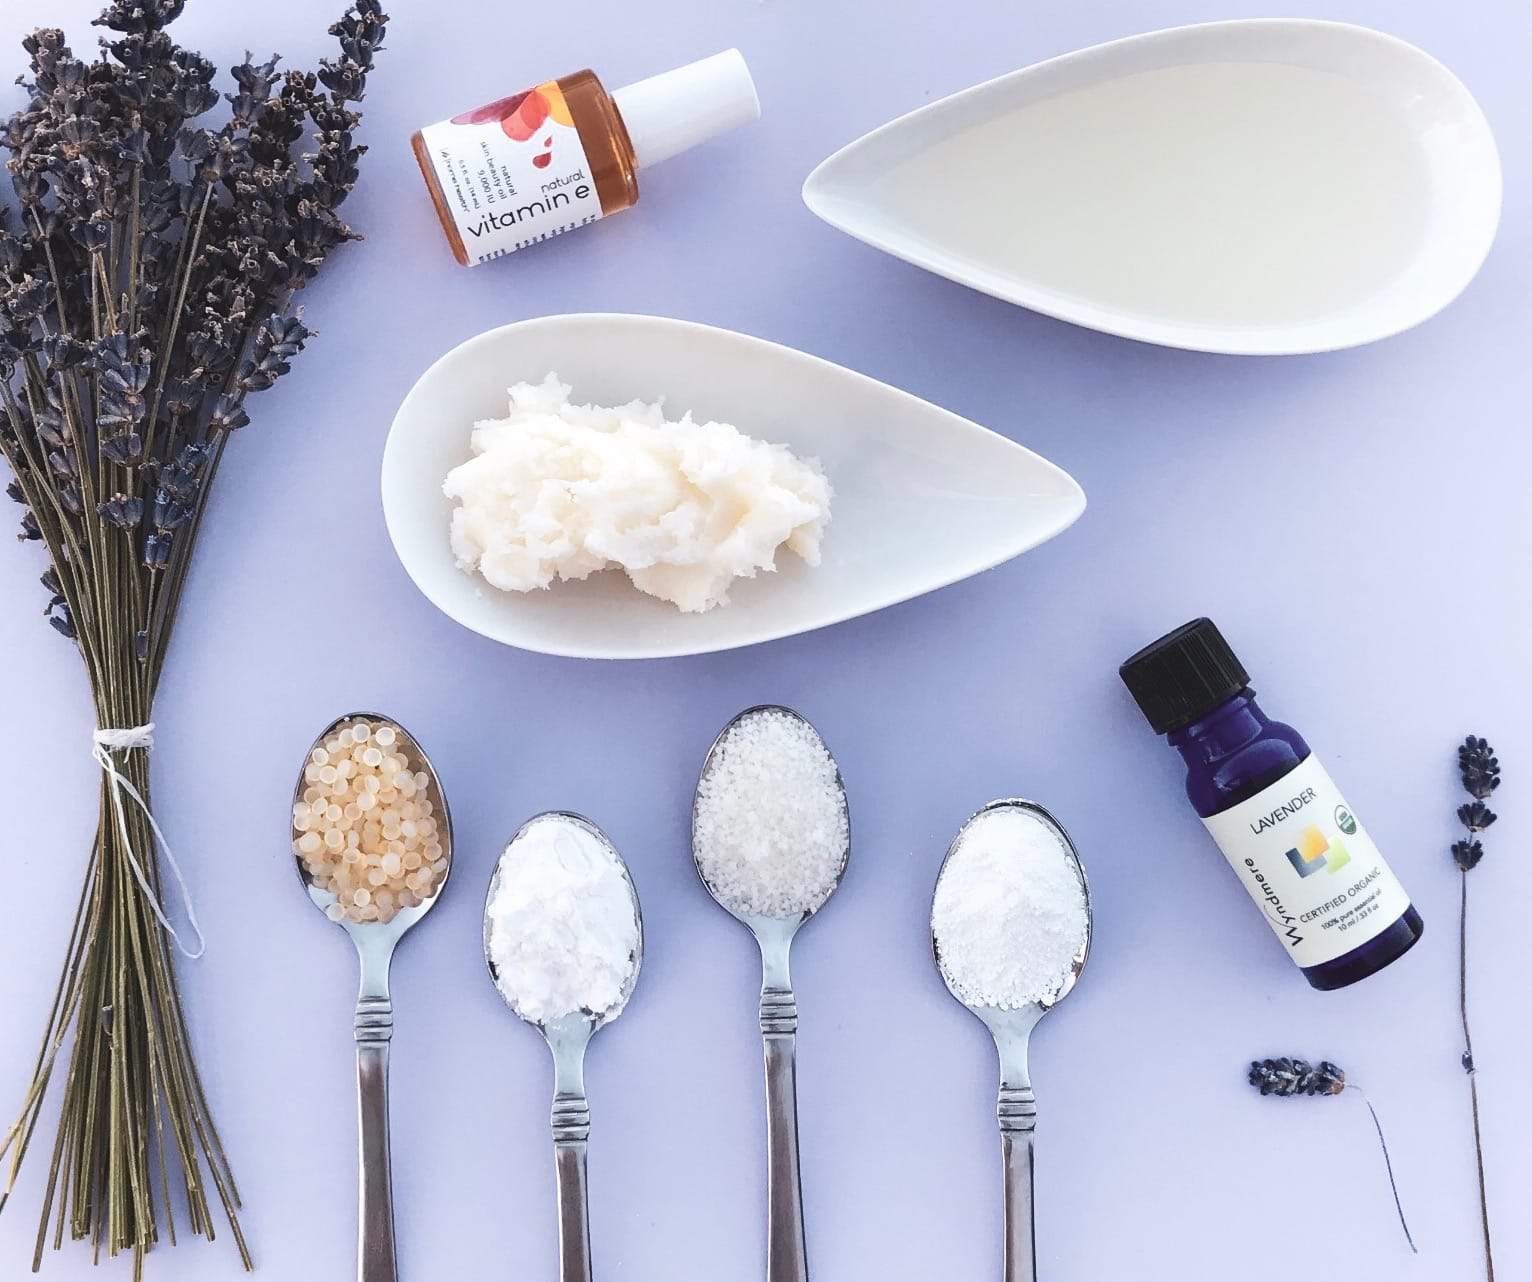 How to Make DIY Natural Deodorant (without baking soda)